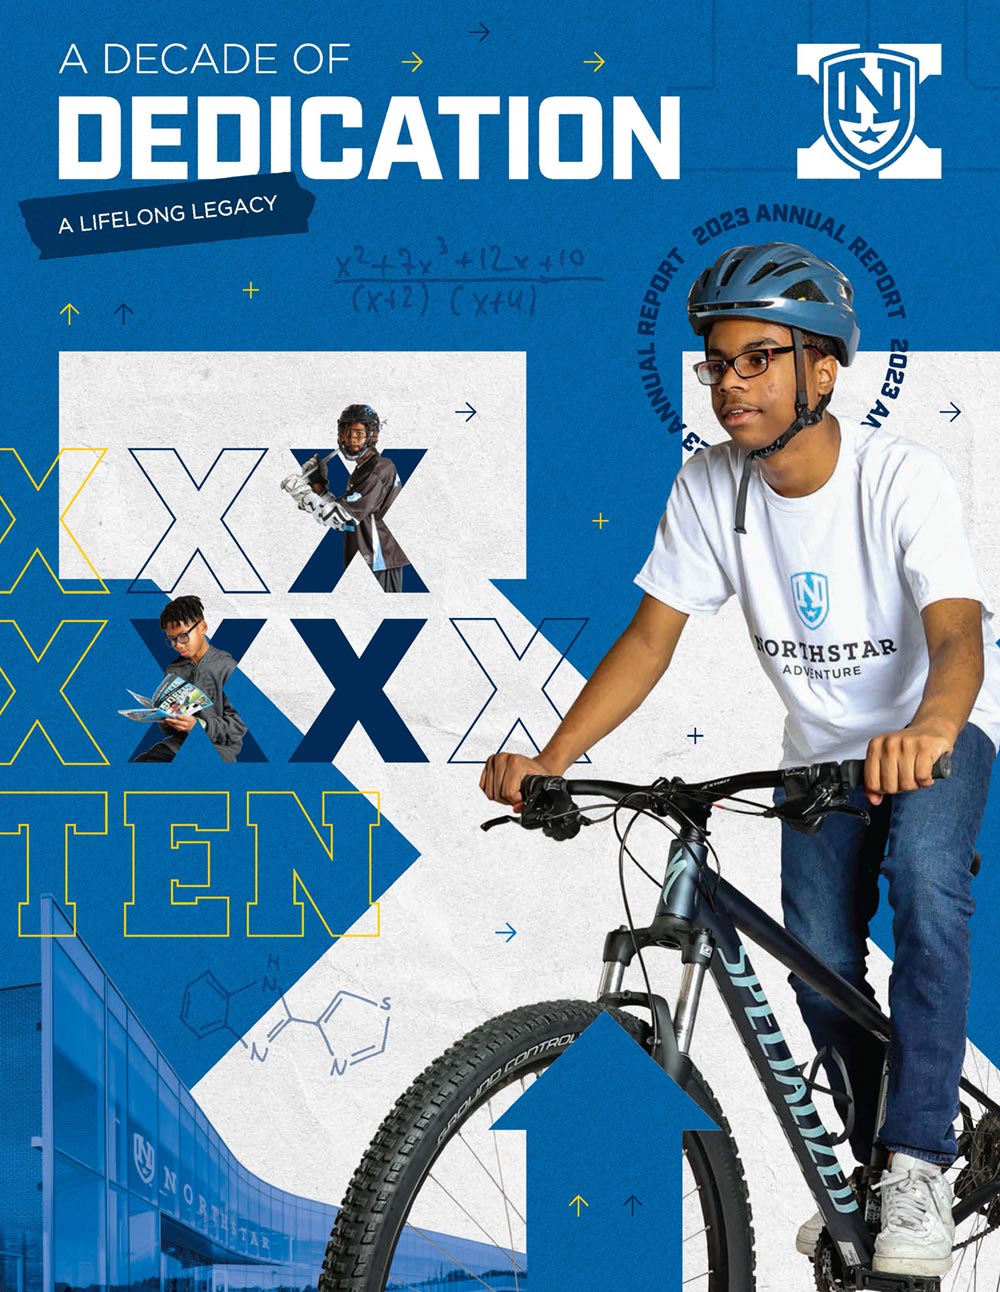 NorthStar 2023 Annual Report cover image